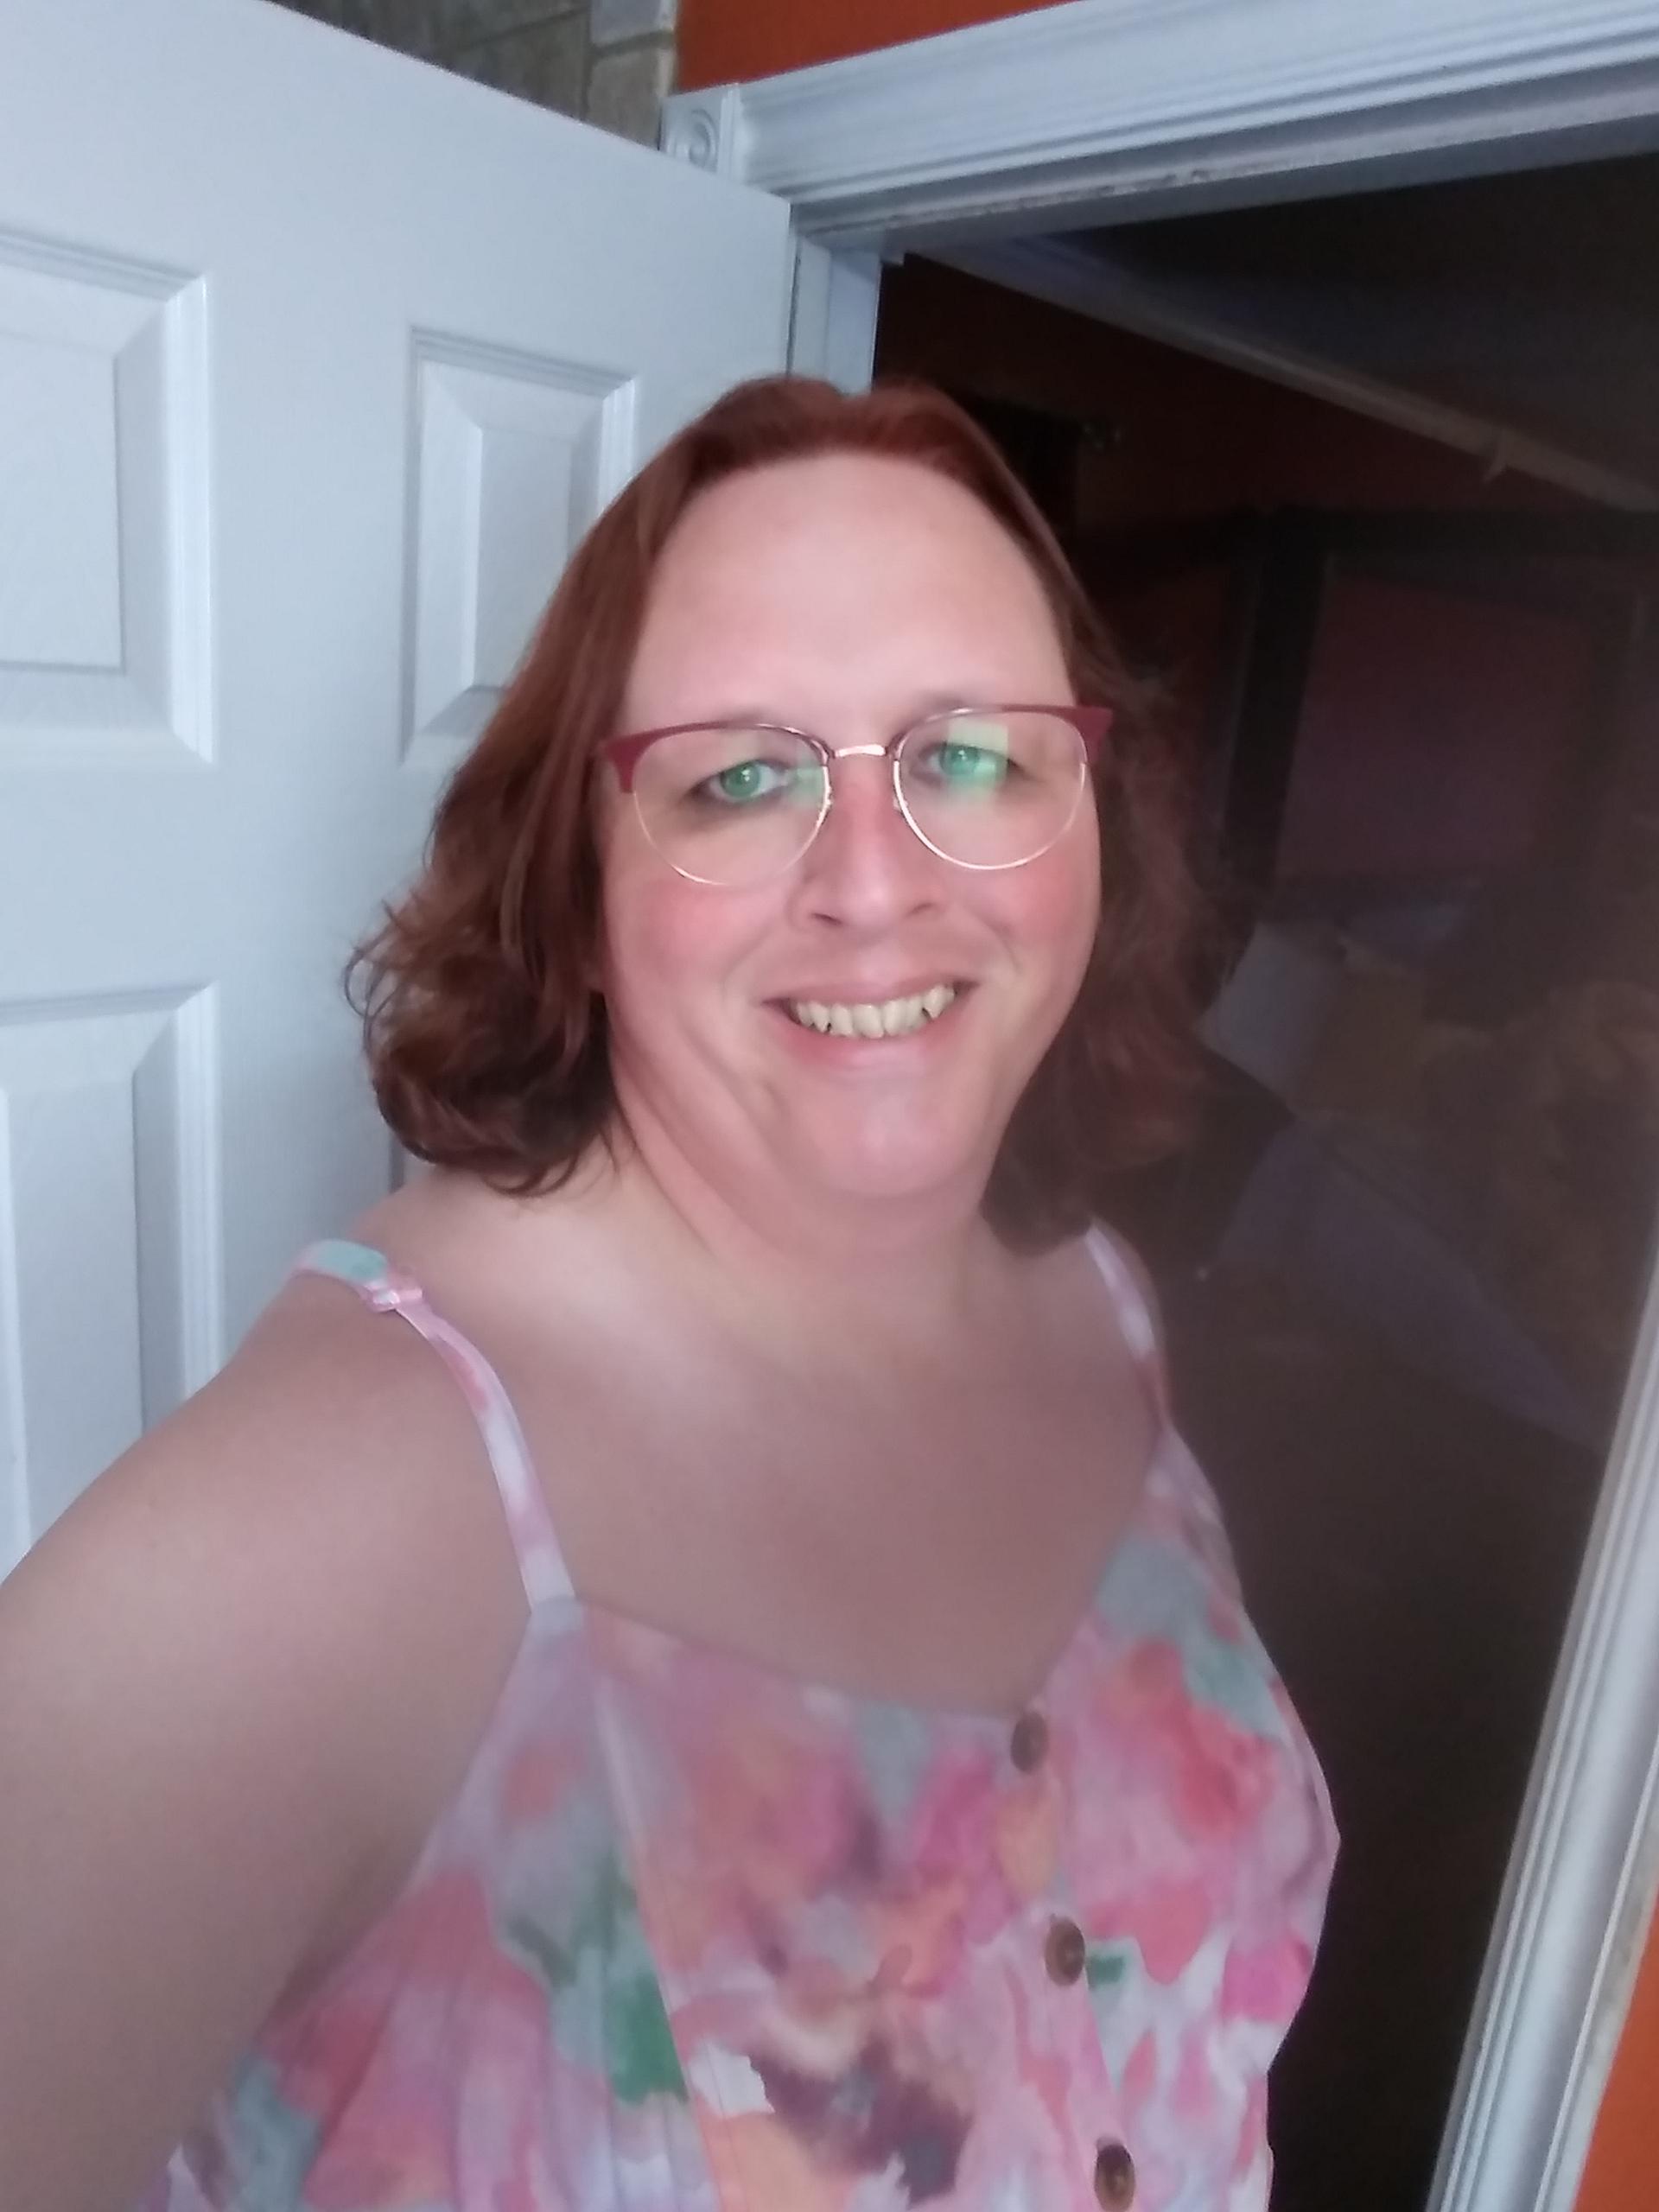 45 Dyed My Hair For The First Time No Makeup 11 Mo Hrt Scrolller